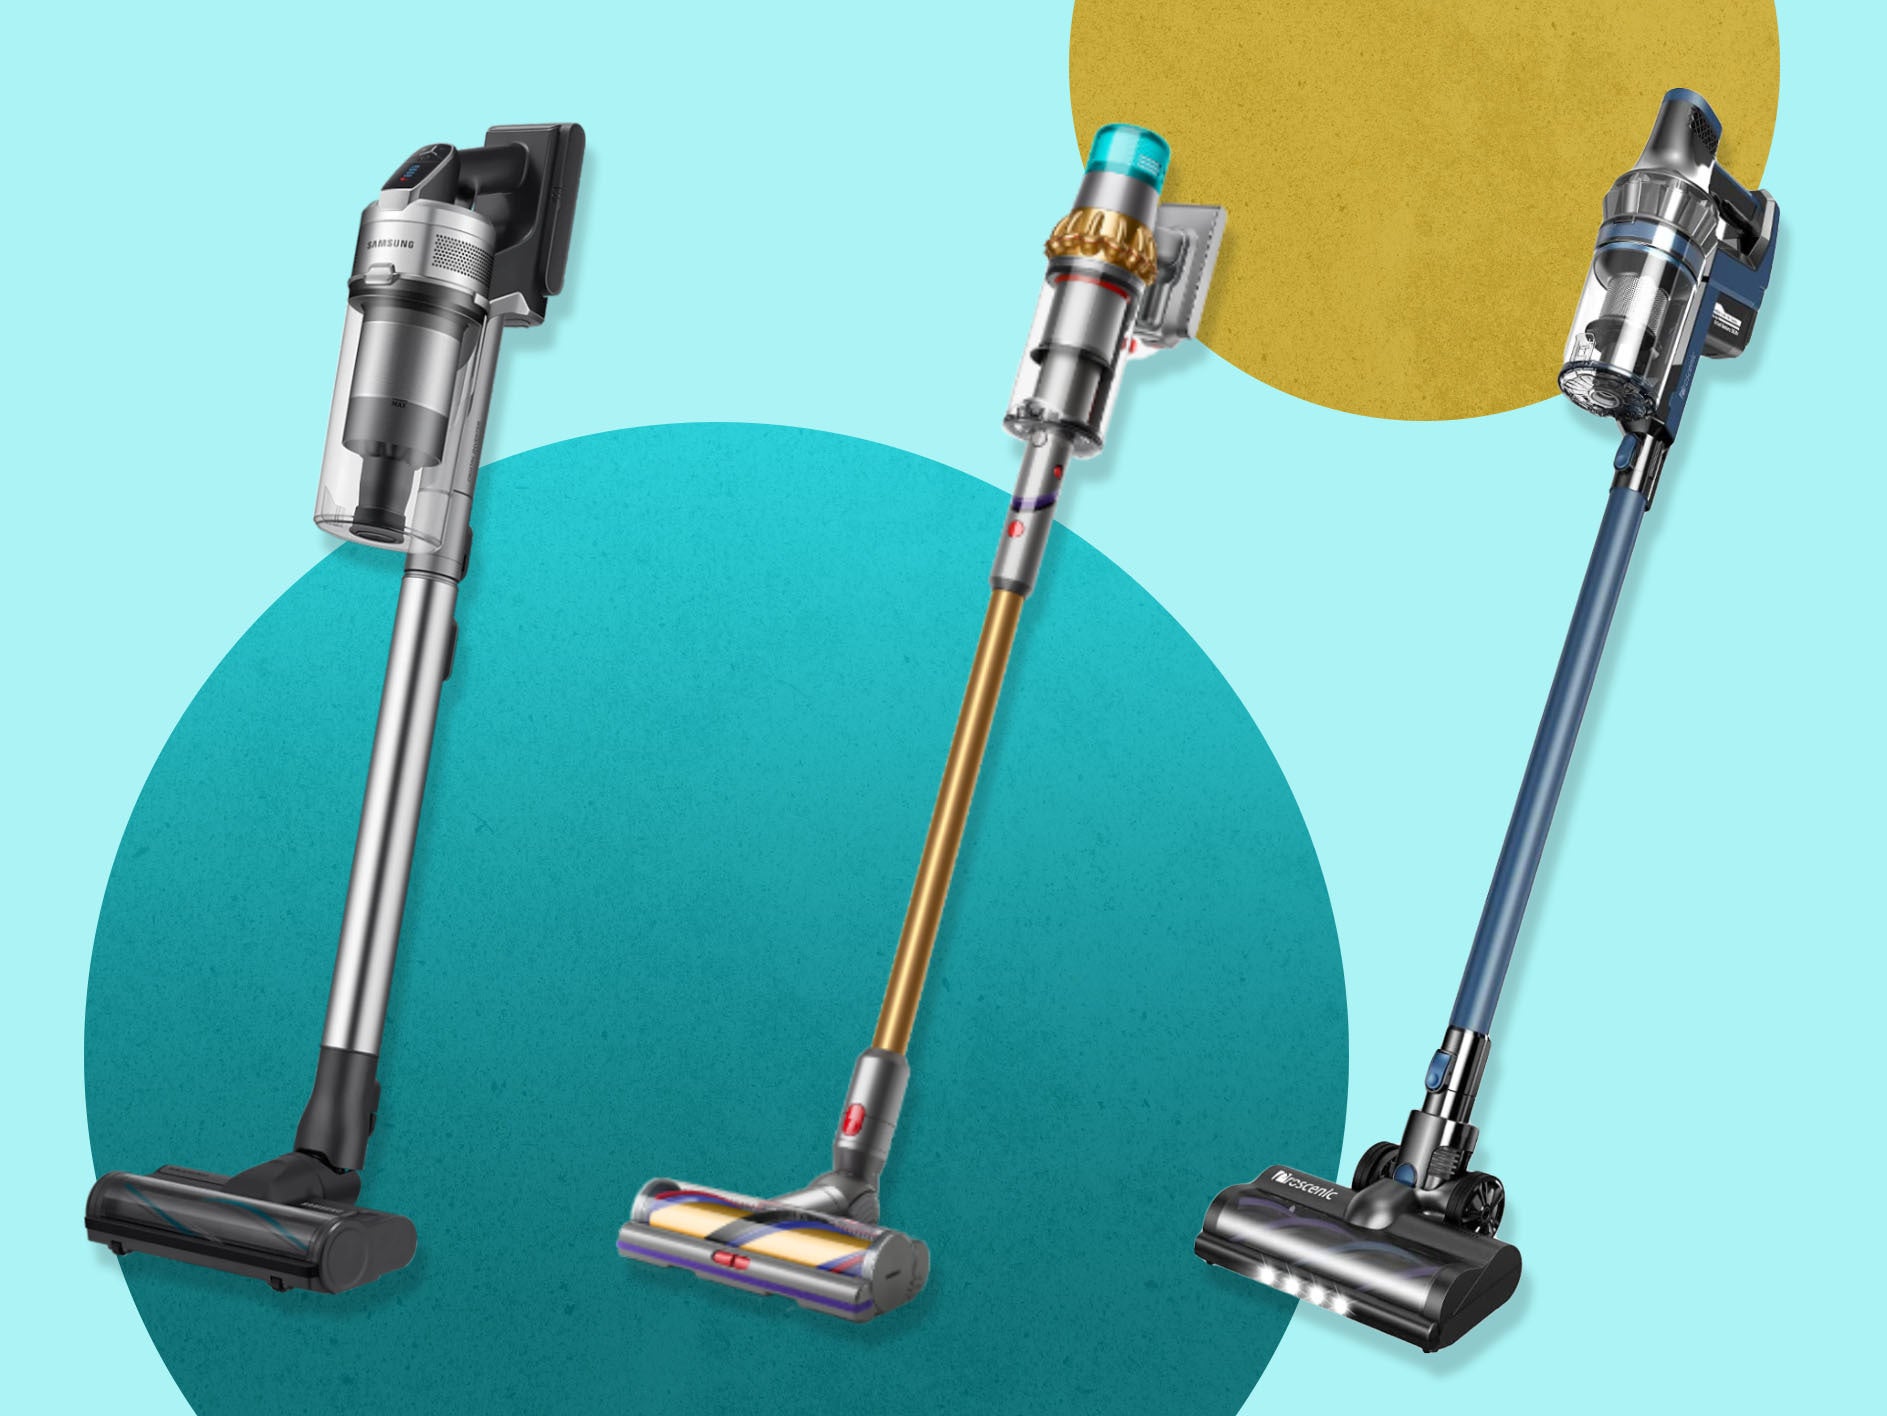 8 best cordless vacuum cleaners 2022: Stick models for hassle-free hoovering